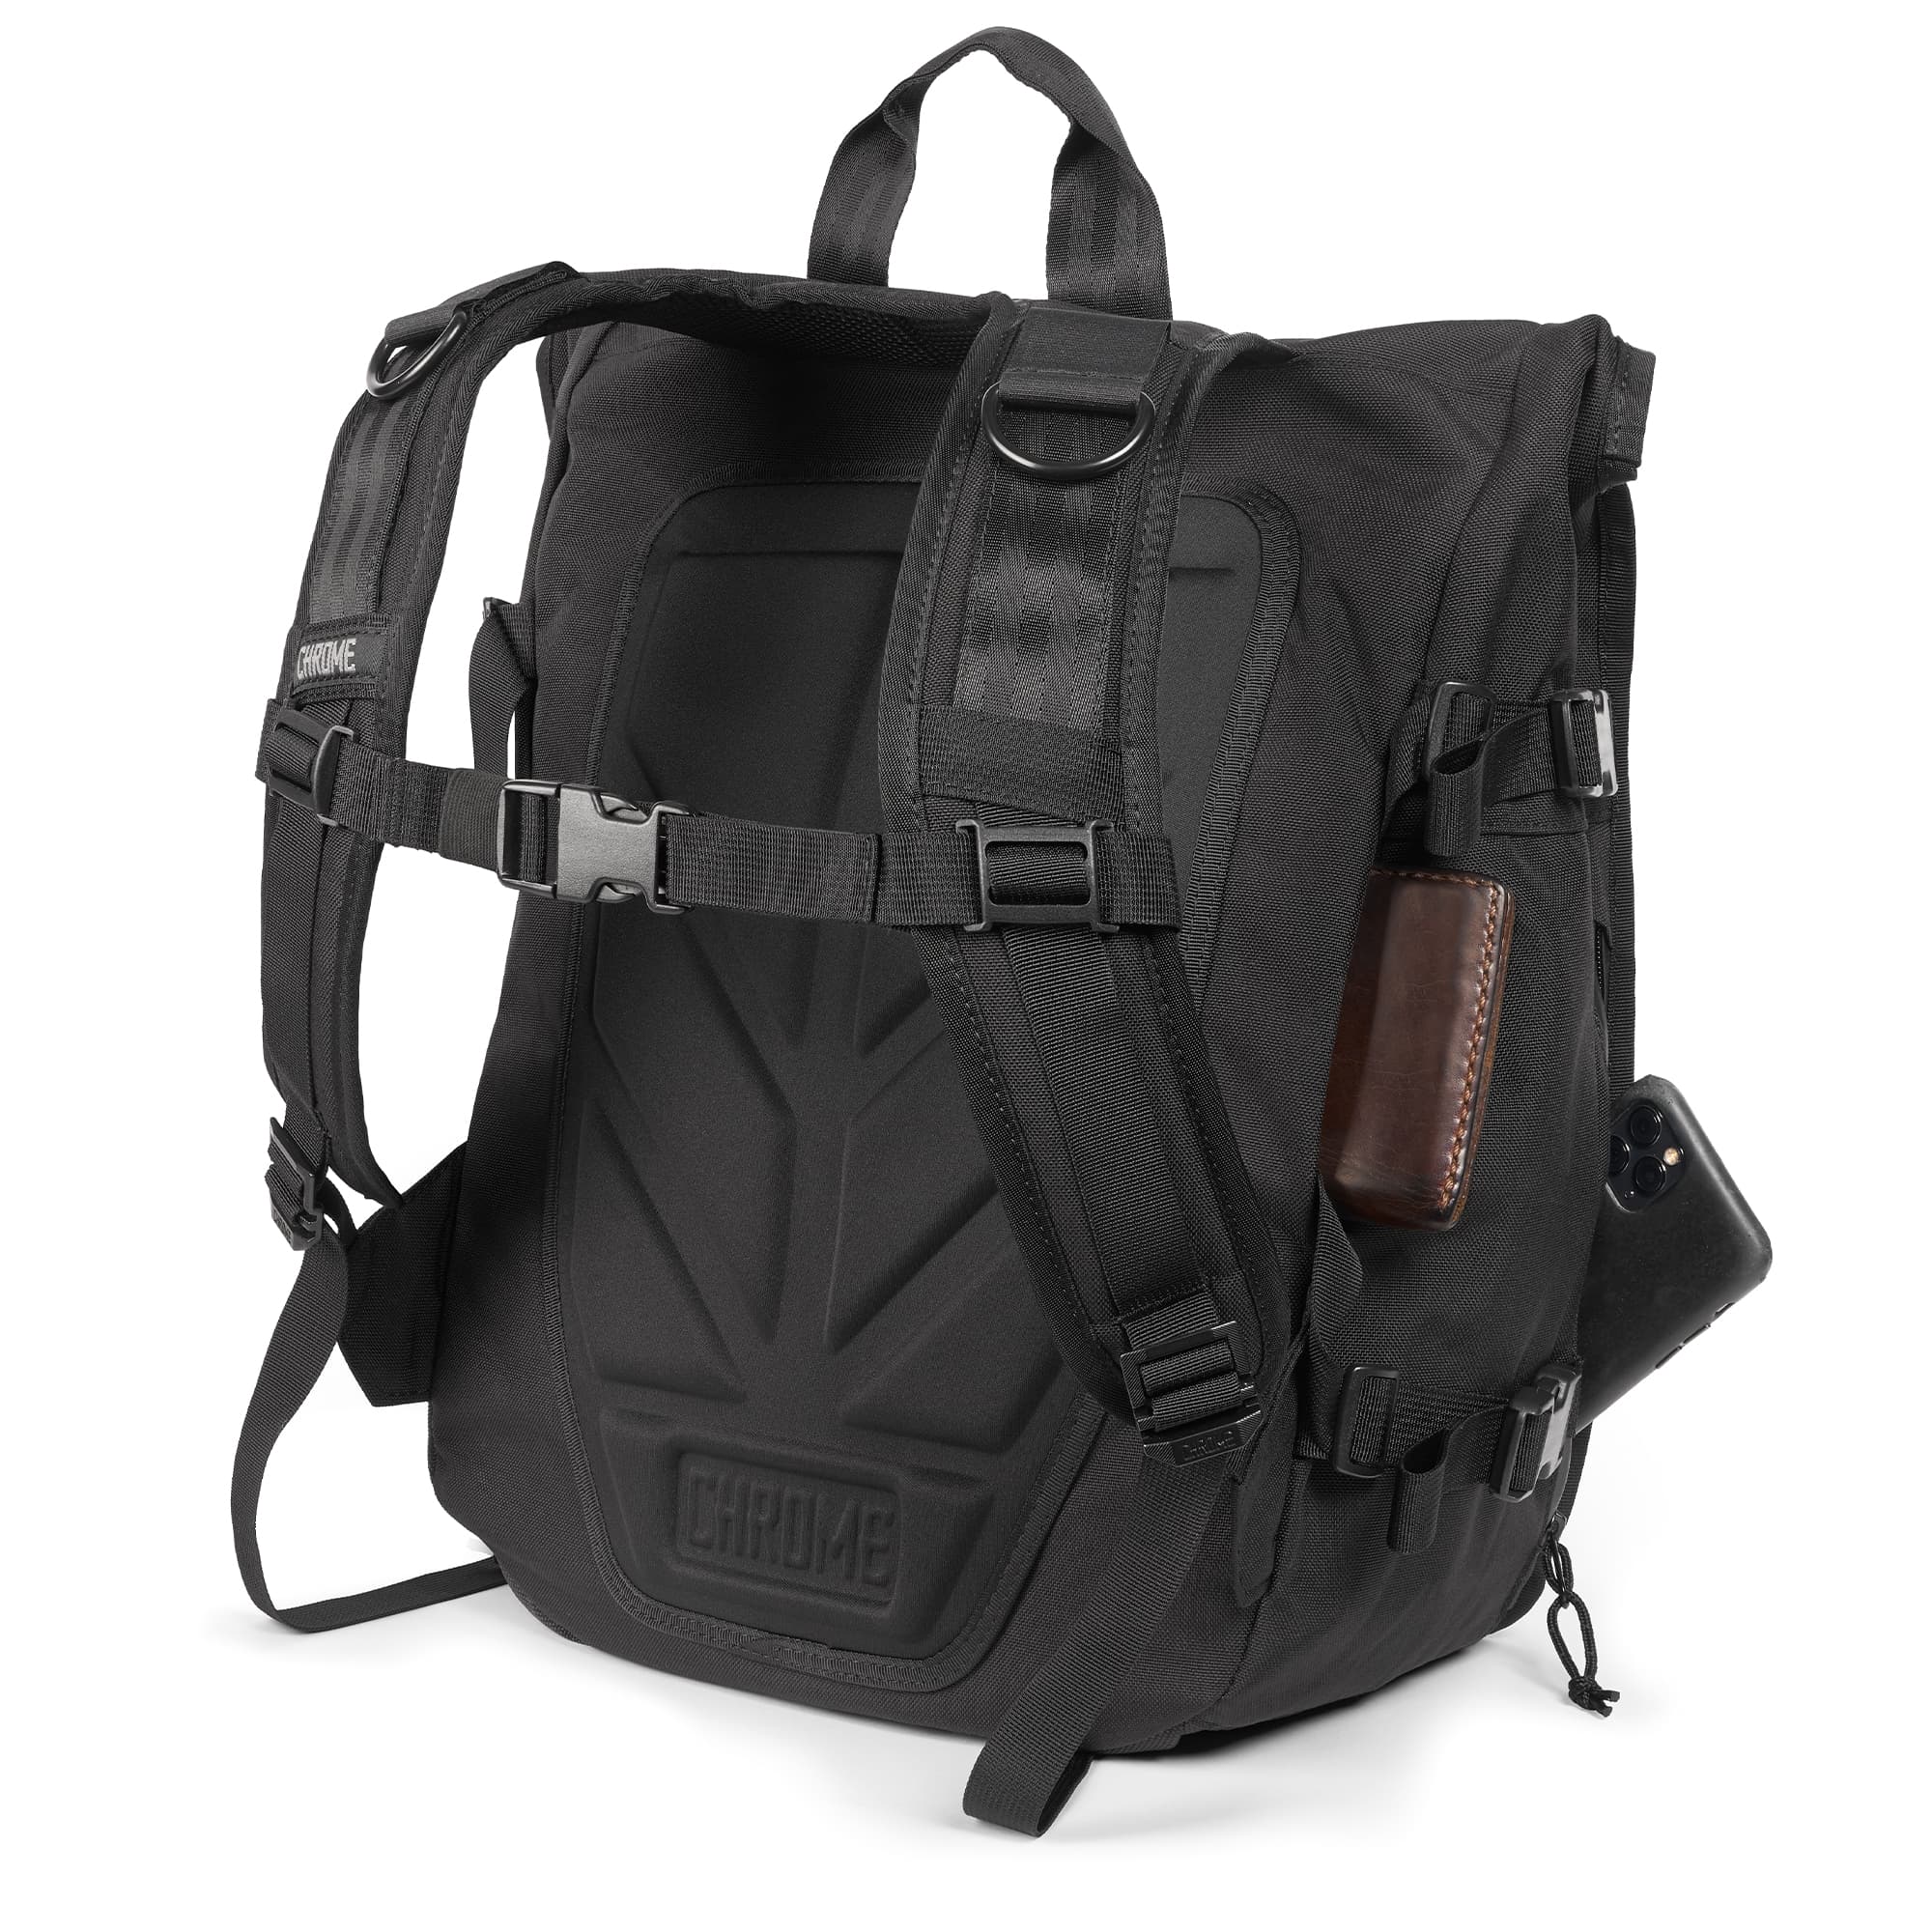 Warsaw medium size flap backpack in black harness view